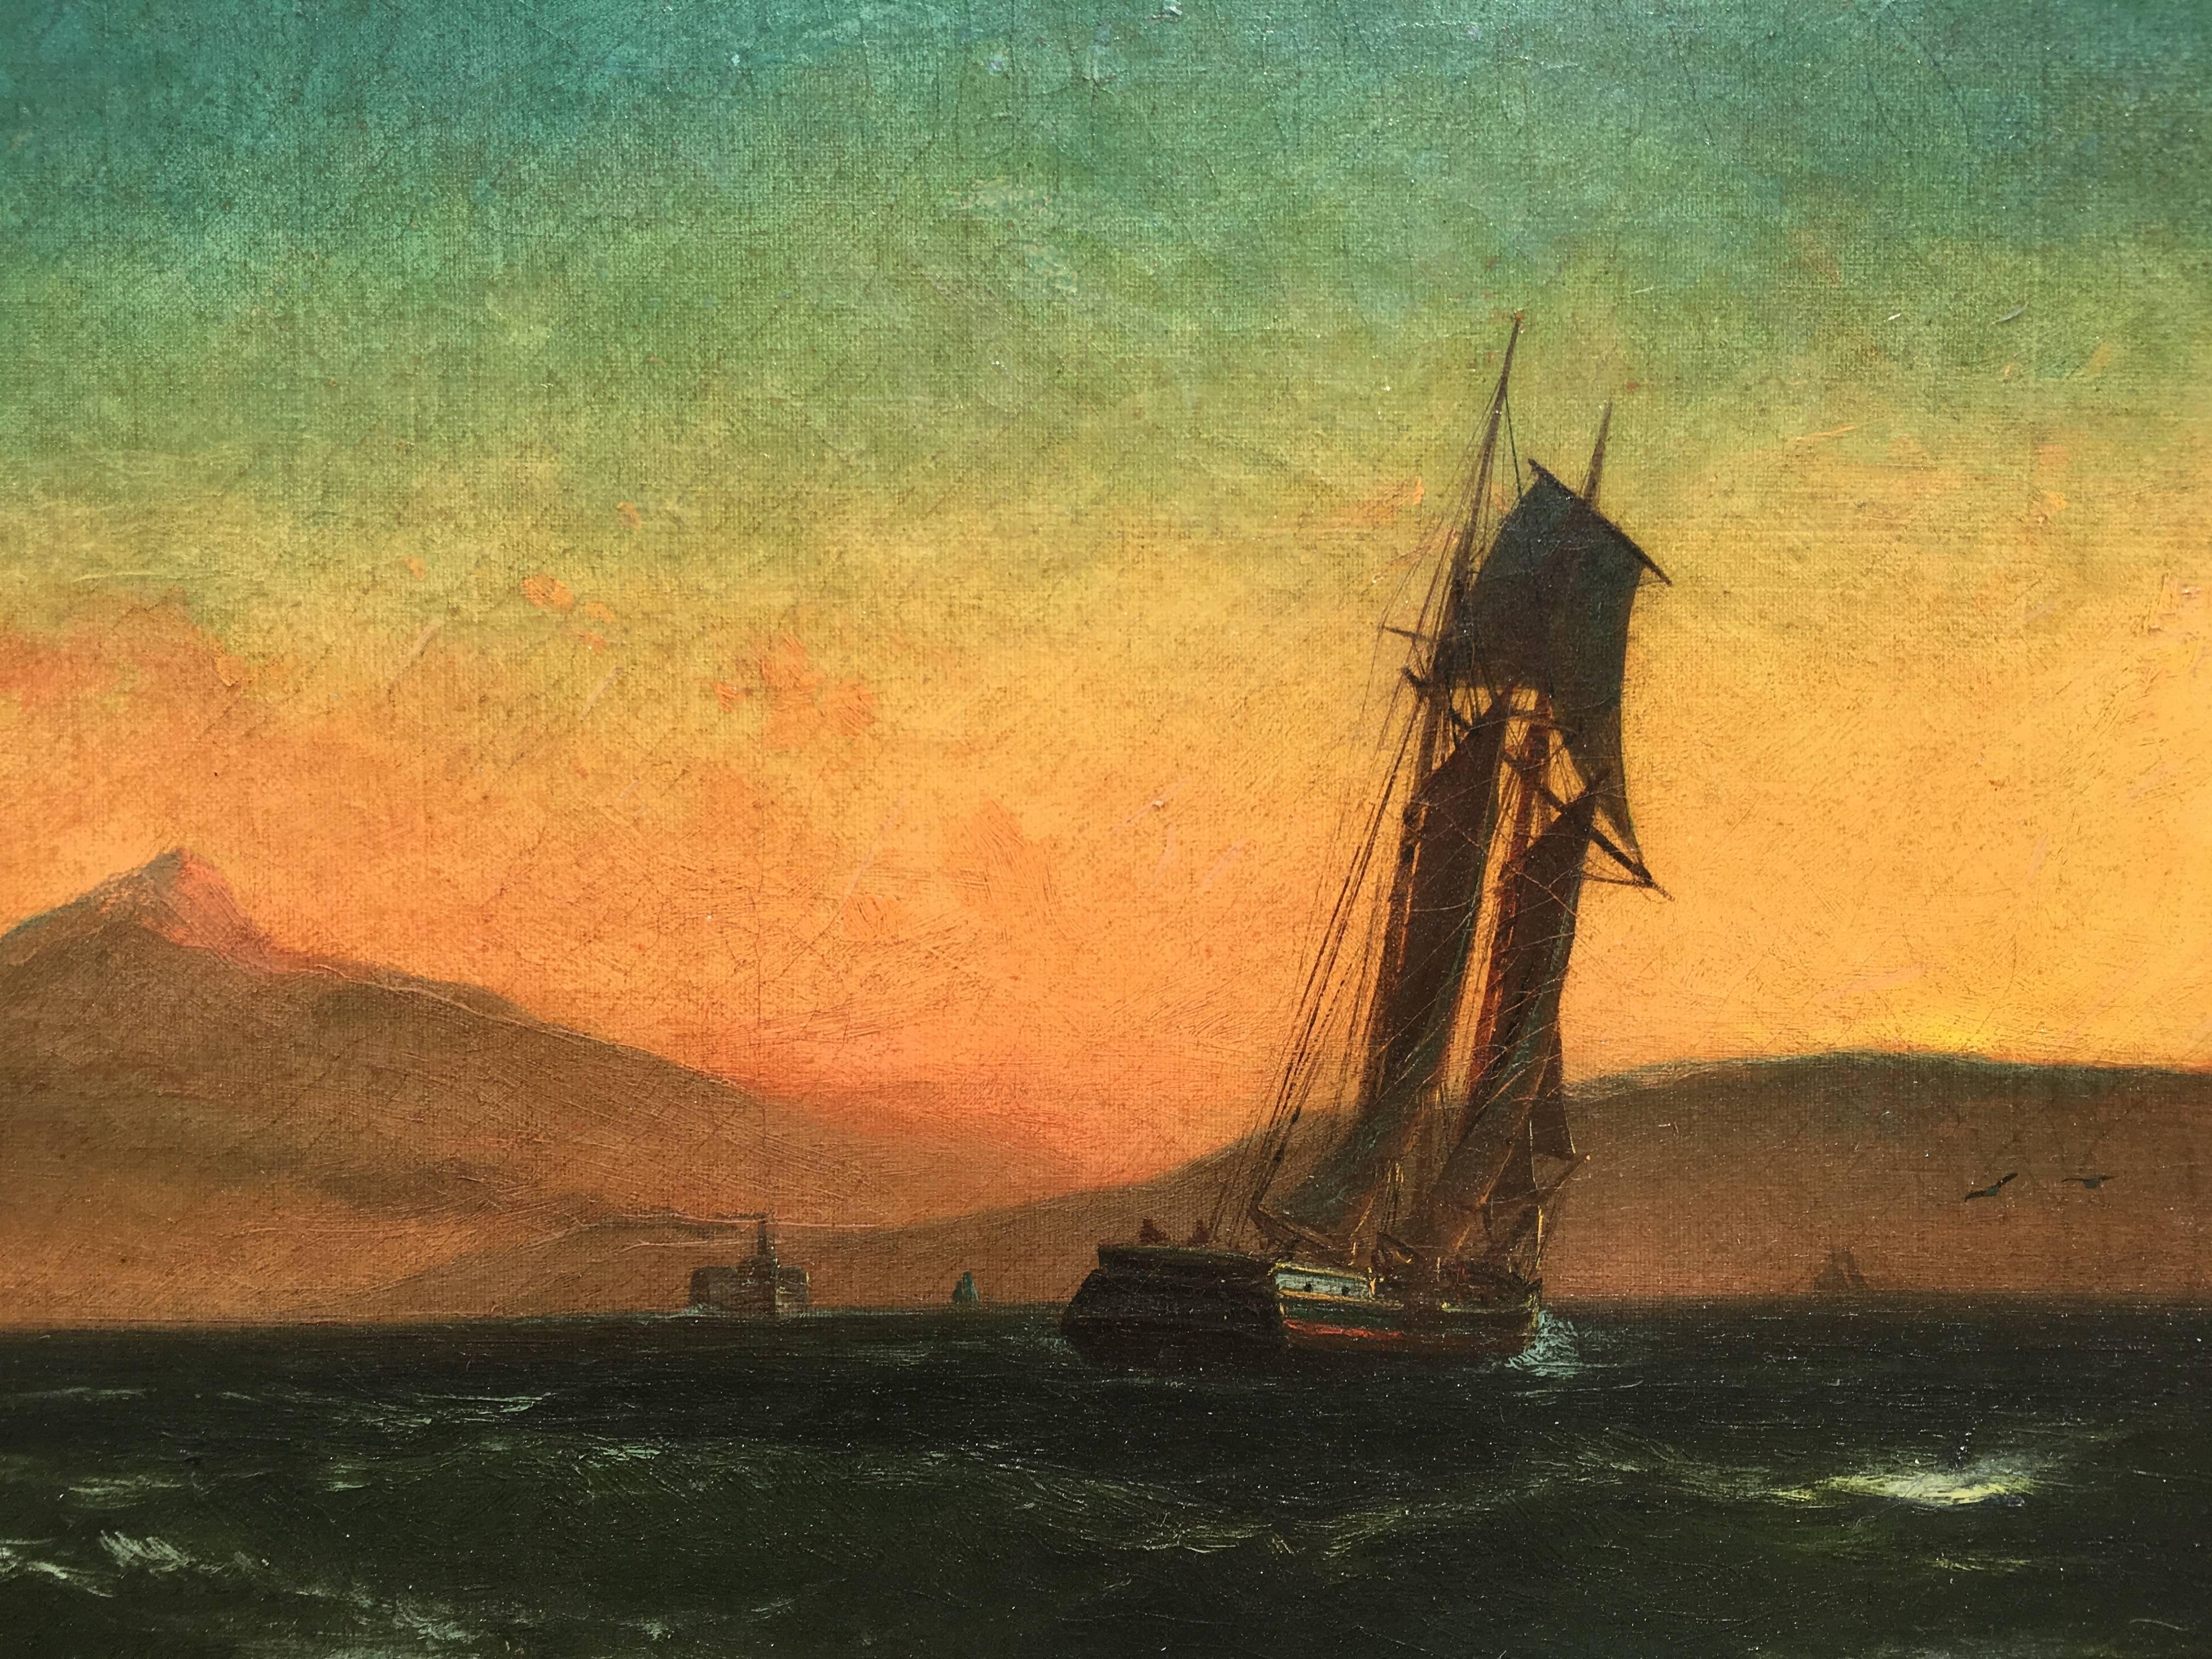 Sunset Sailing in San Francisco Bay - Painting by Gideon Jacques Denny